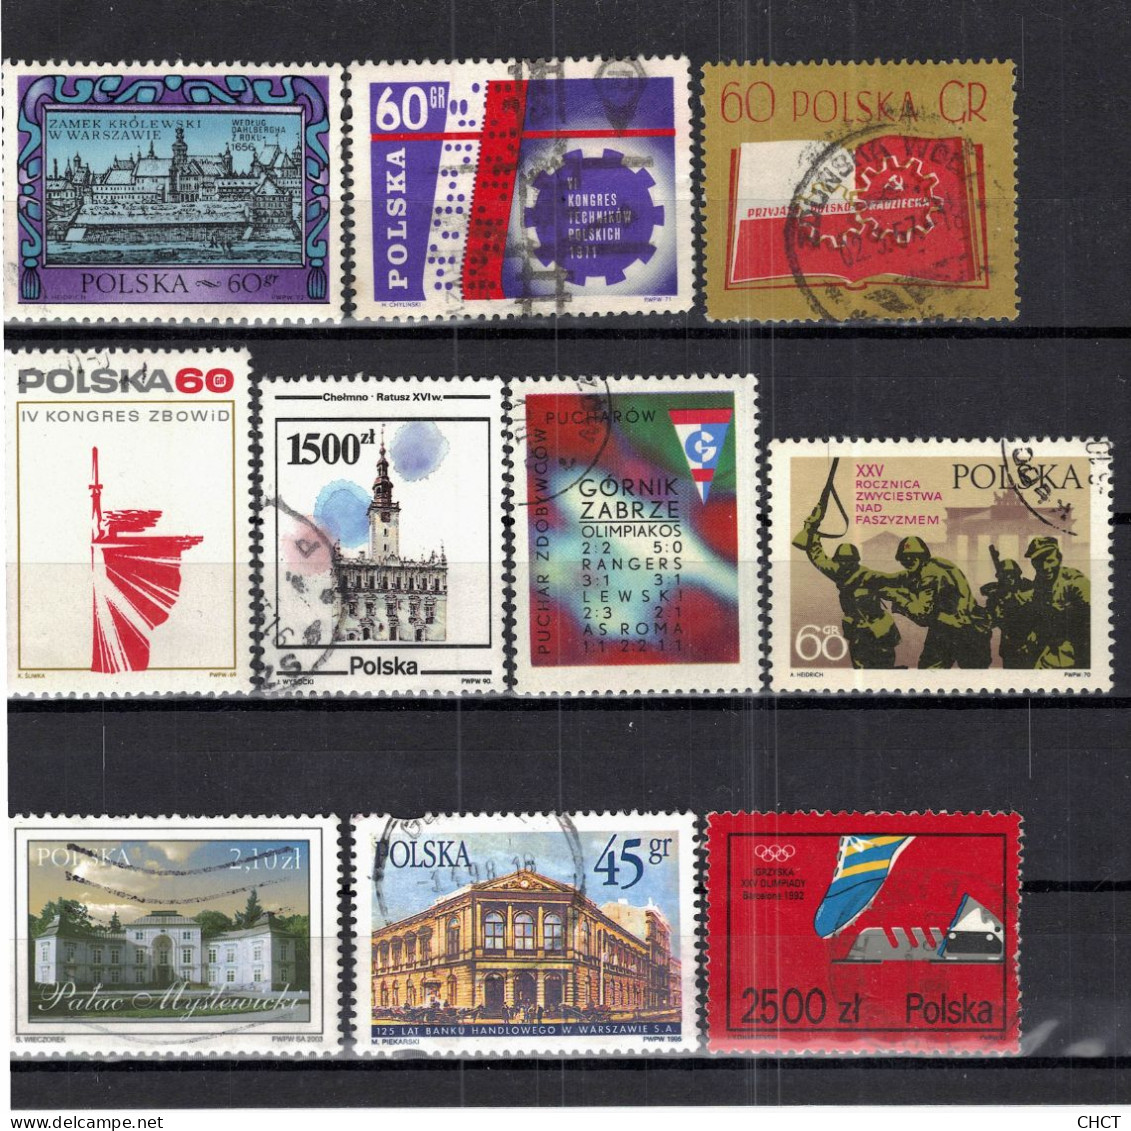 CHCT84 - Poland Mix - 10 Stamps, Mono Series (1 Stamp), Used, Poland - Used Stamps